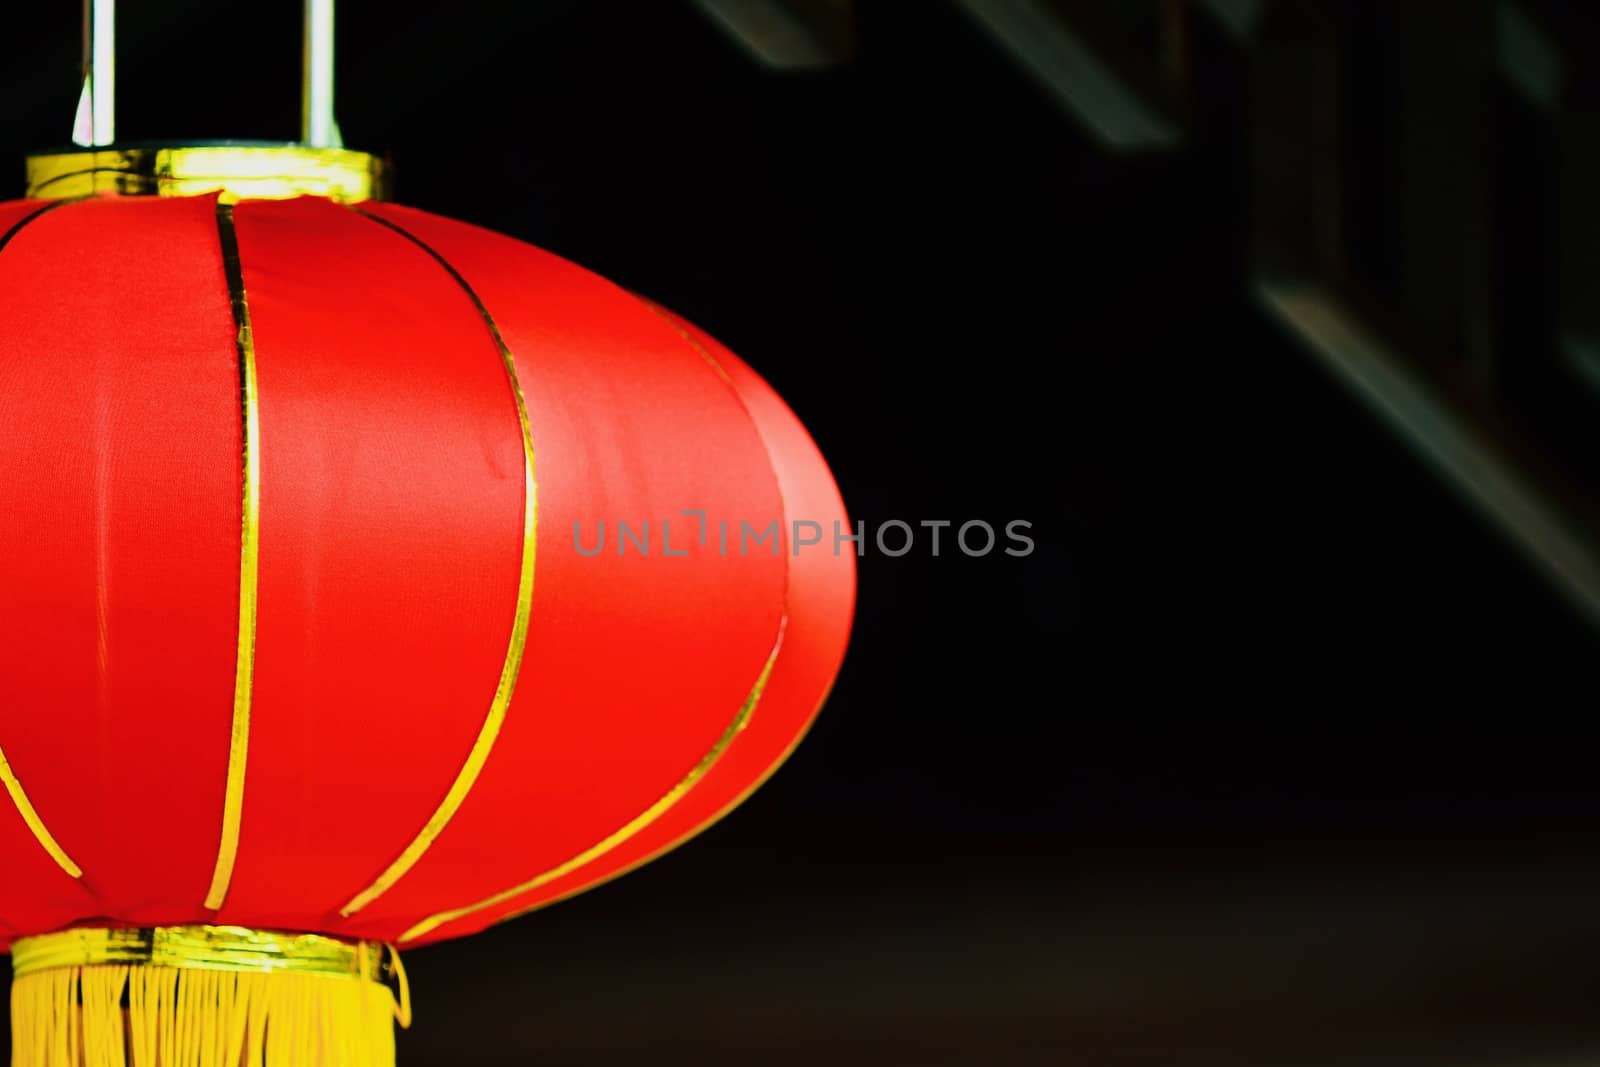 Chinese New Year decorations; traditions and celebrations